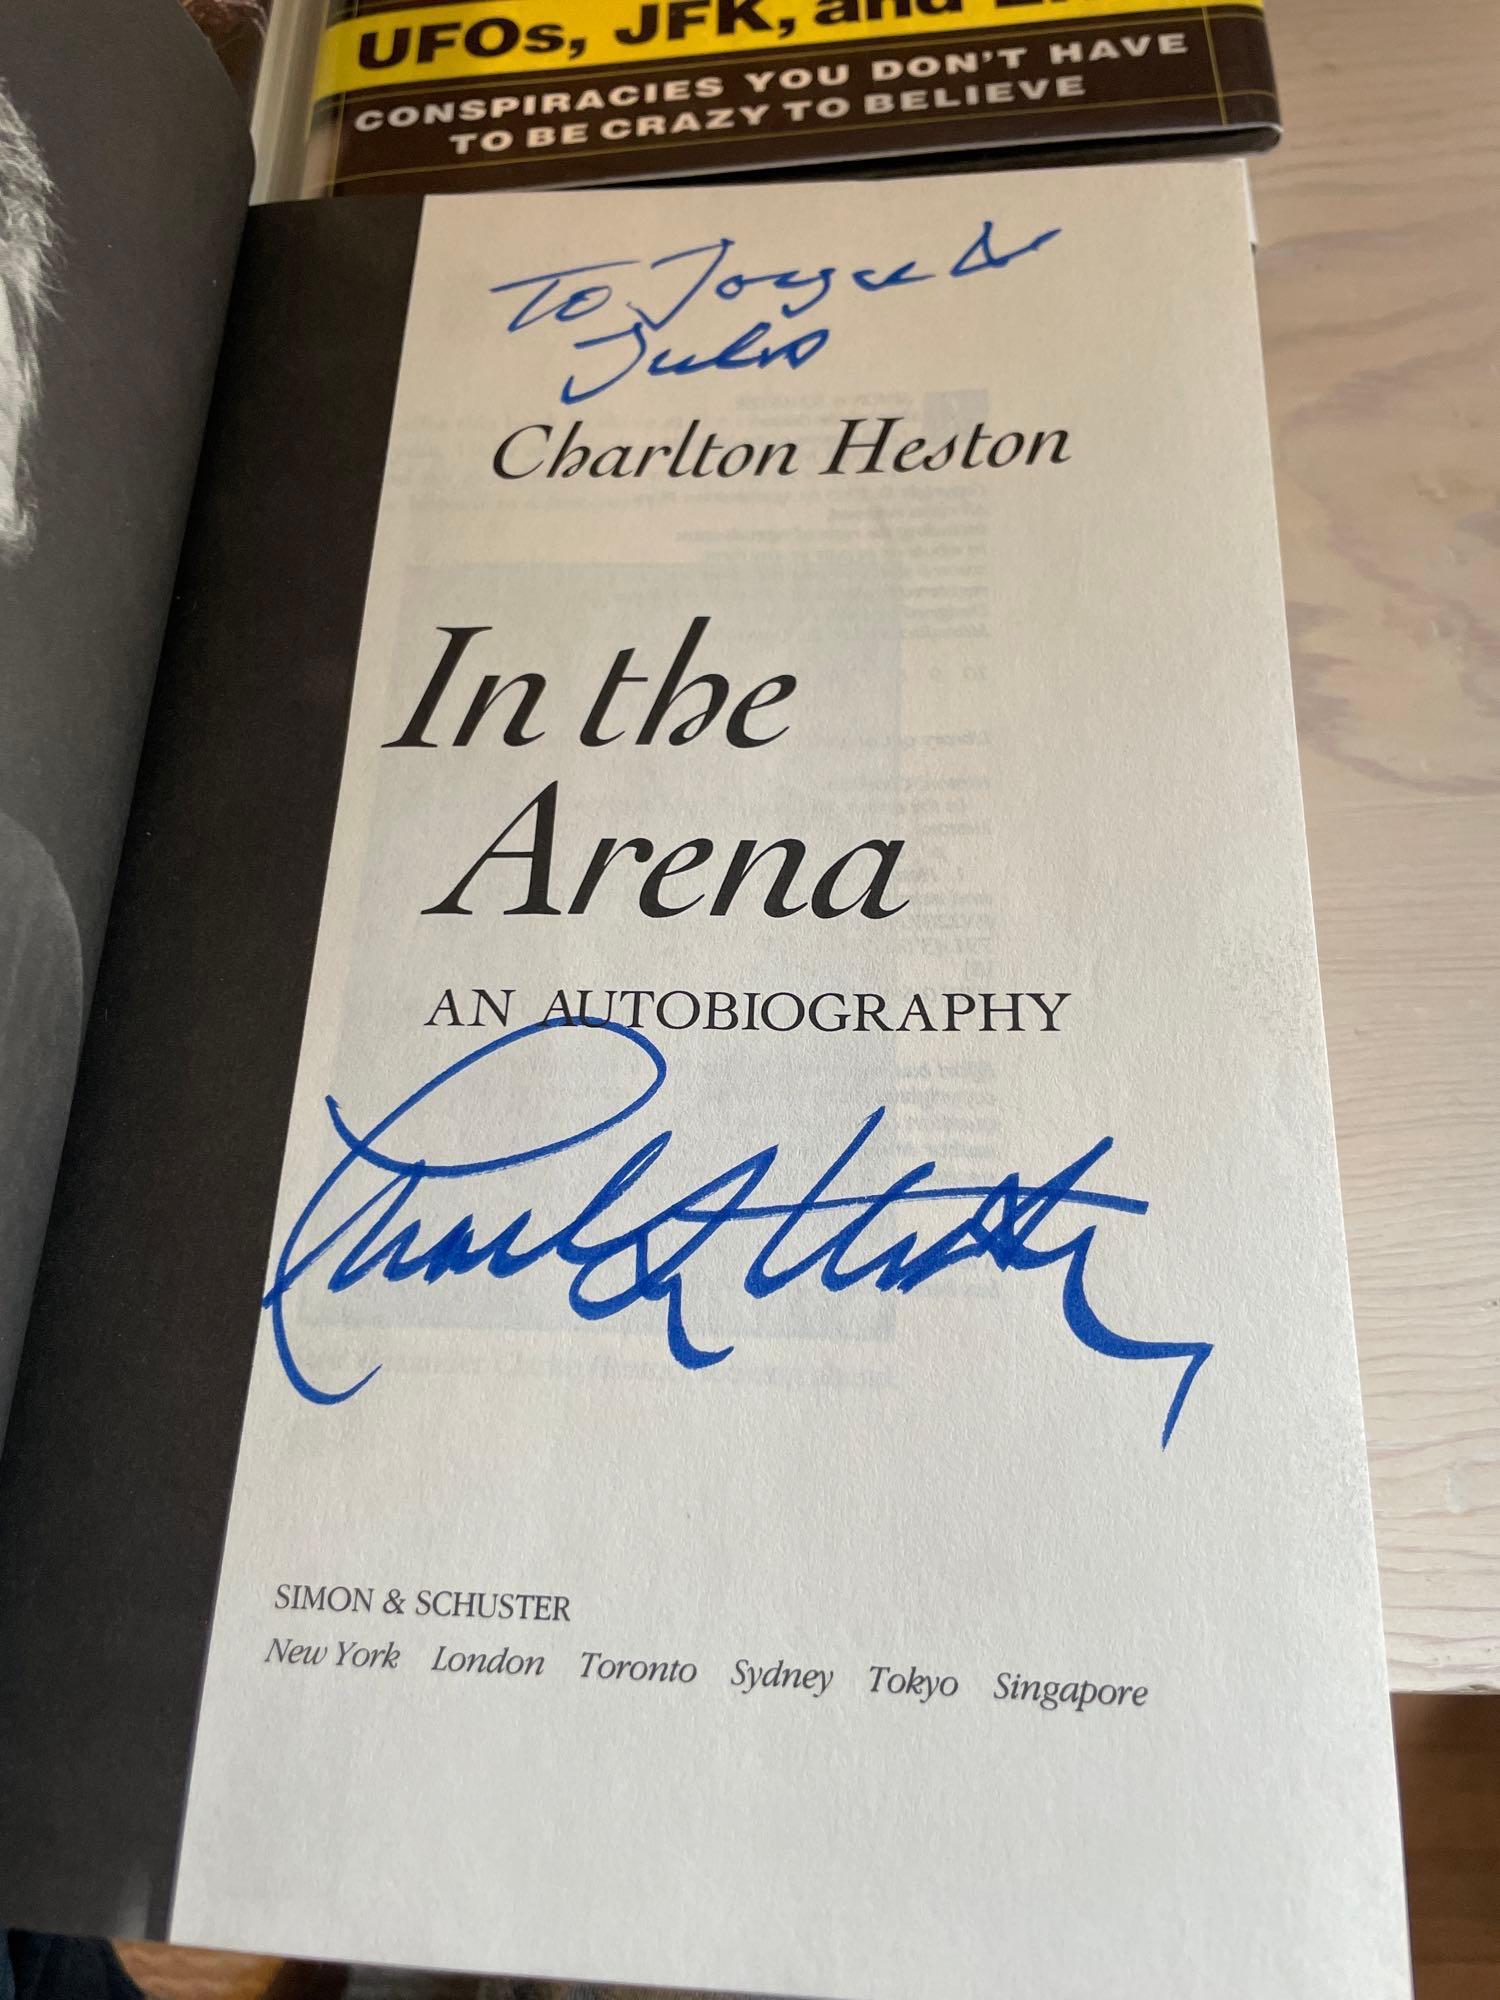 Assorted Signed Books (6)